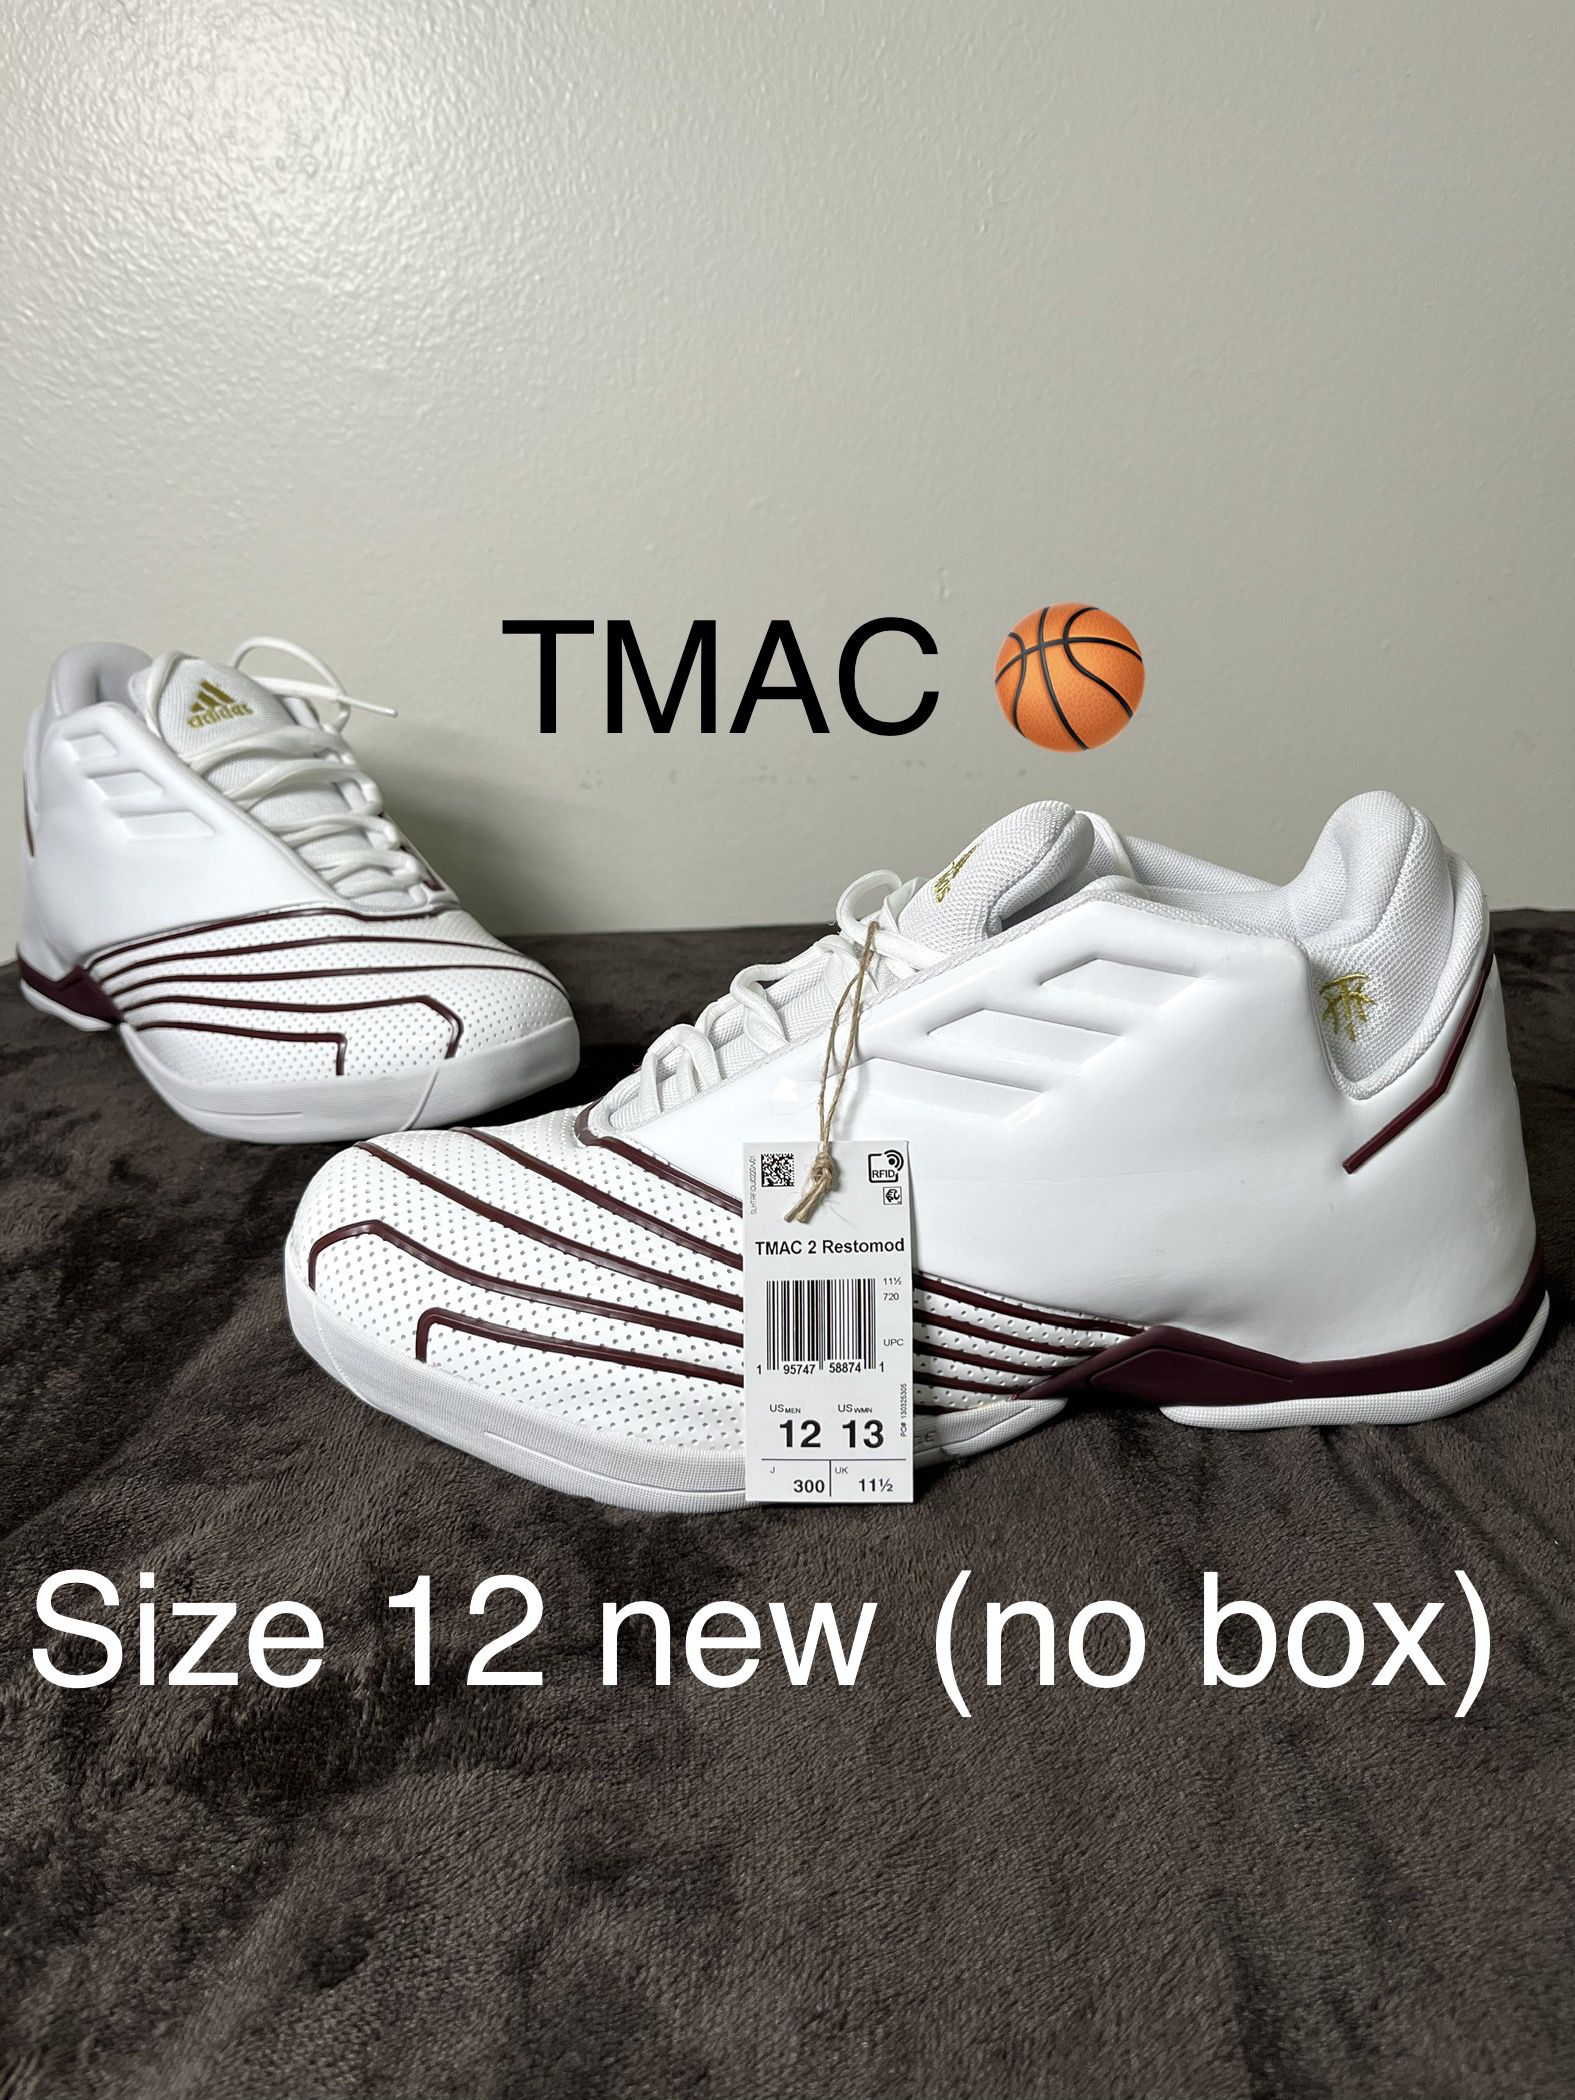 Sz 12 Adidas Tracy McGrady TMAC 2 Restomod White Basketball Shoes for Sale  in West Hollywood, CA - OfferUp